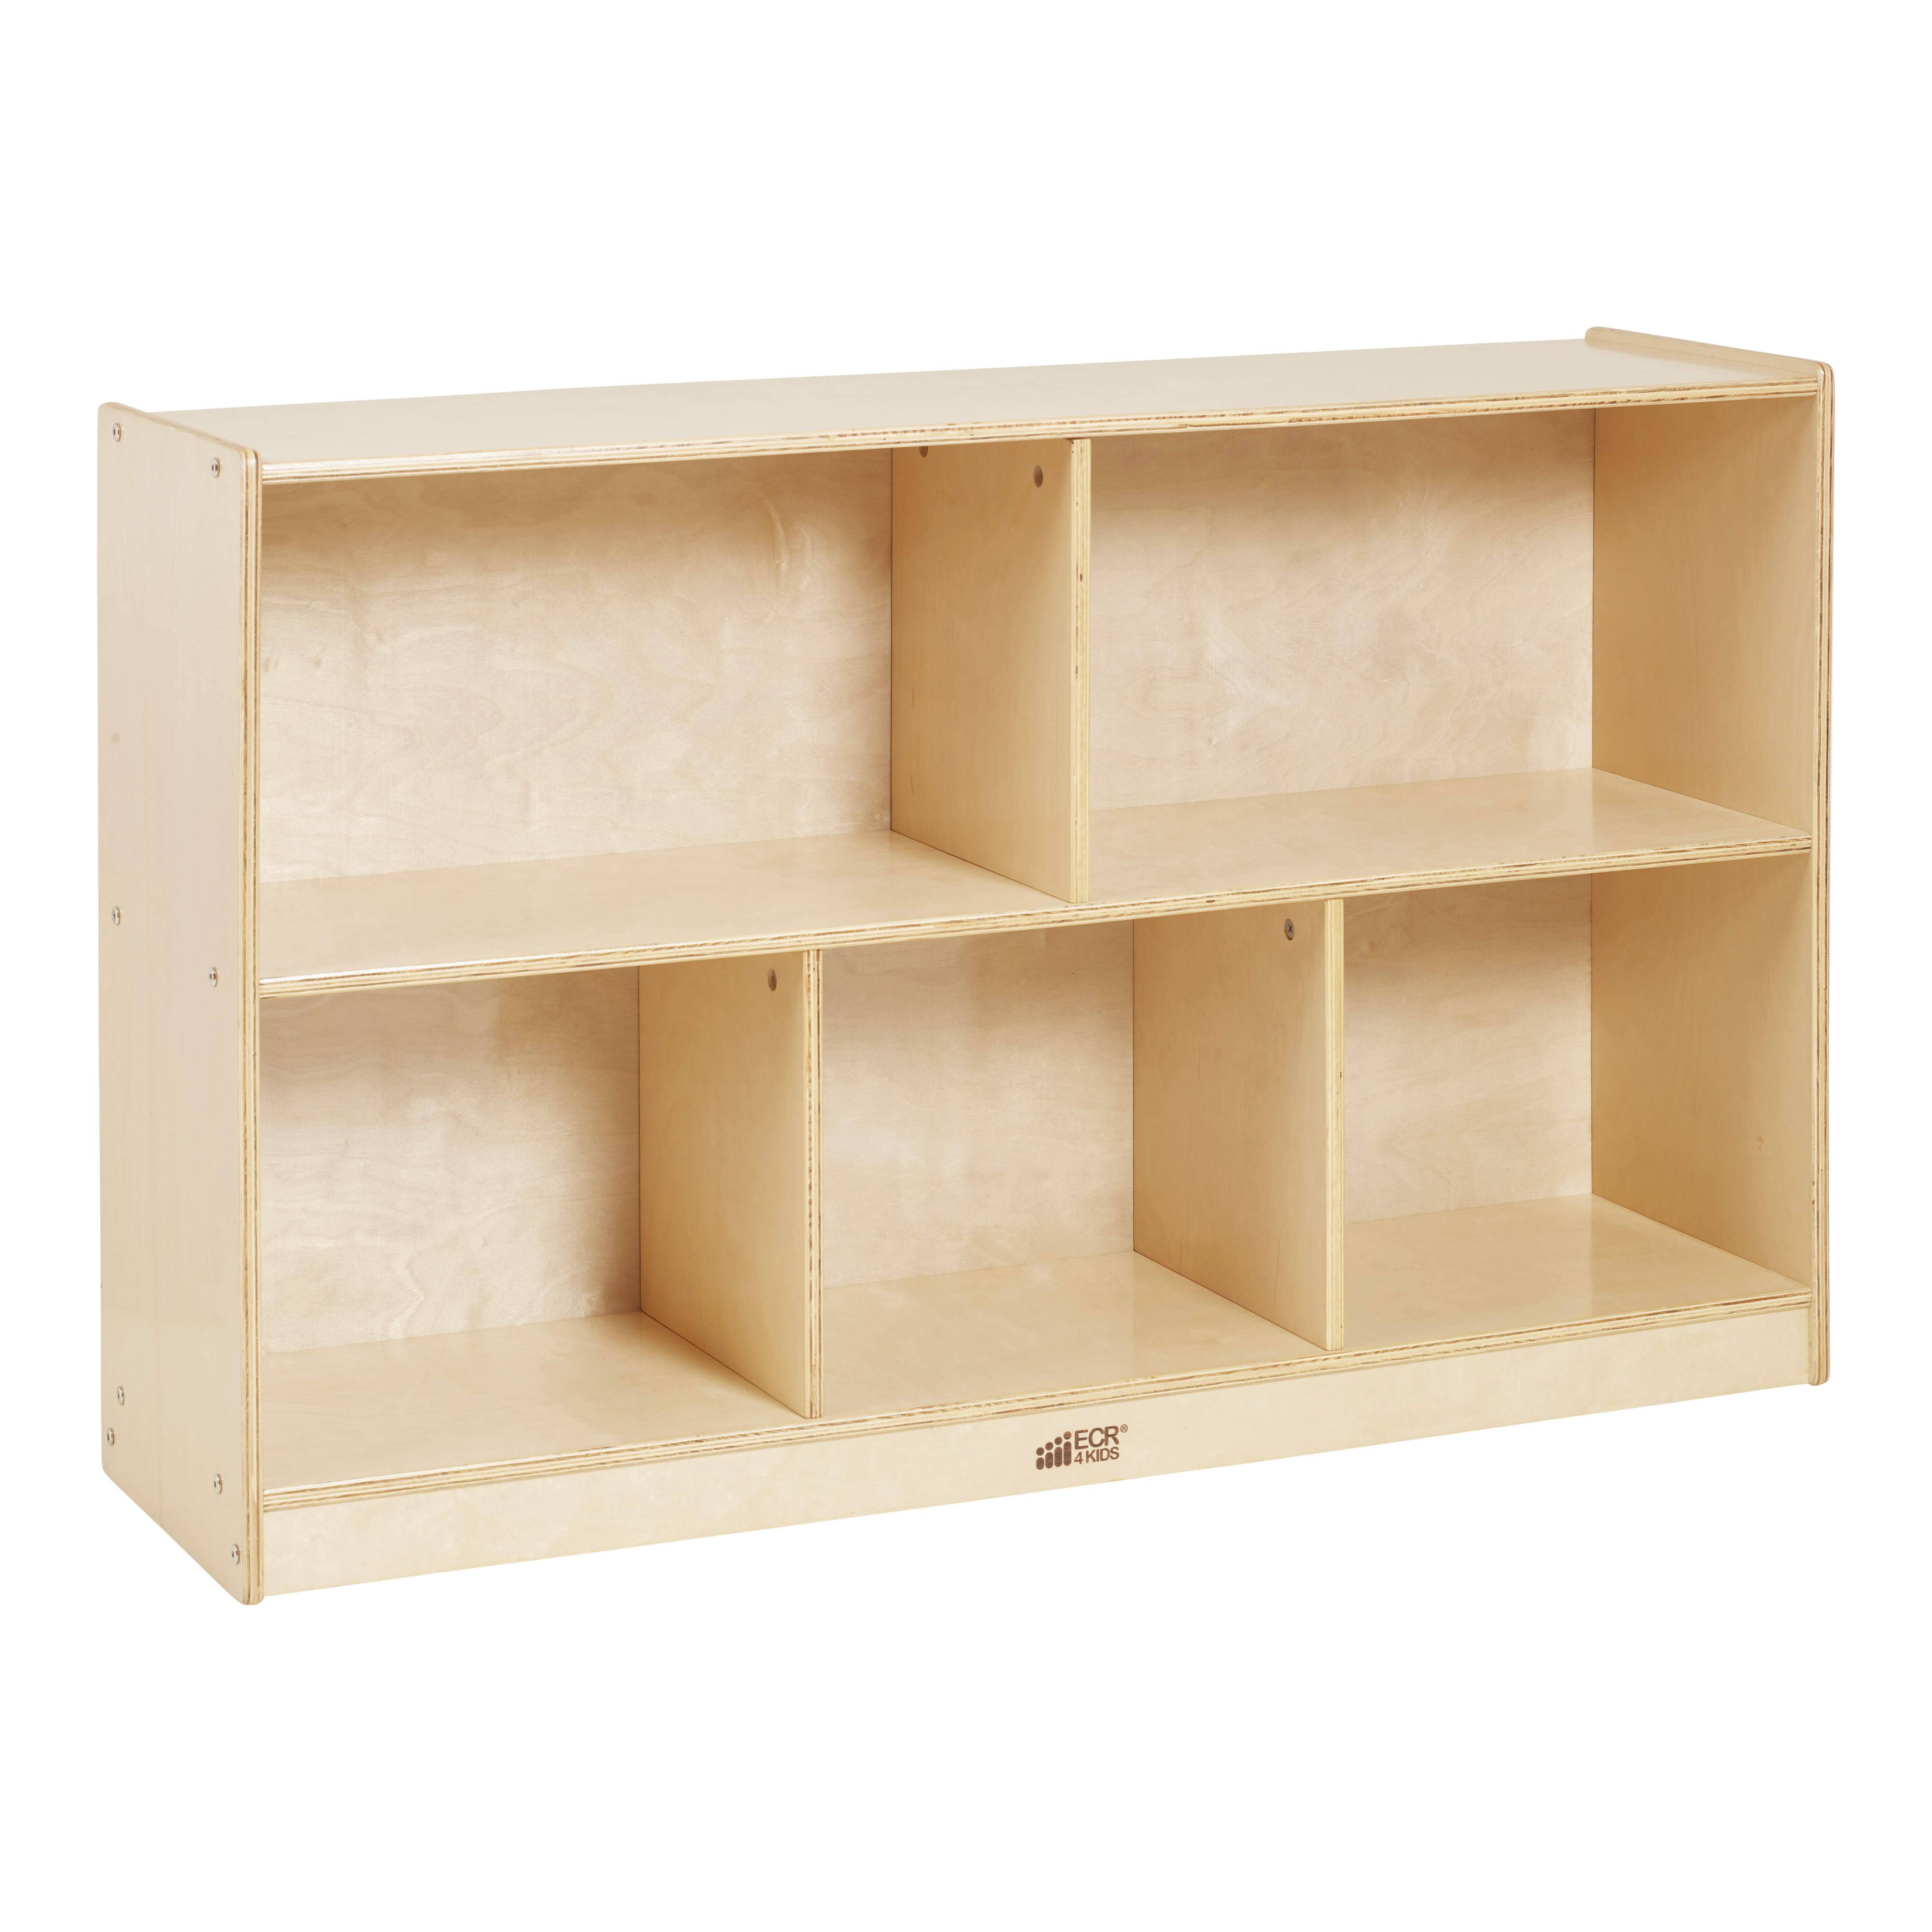 ECR4Kids 5-Compartment Mobile Storage Cabinet, 30in, Classroom Furniture, Natural - image 1 of 11